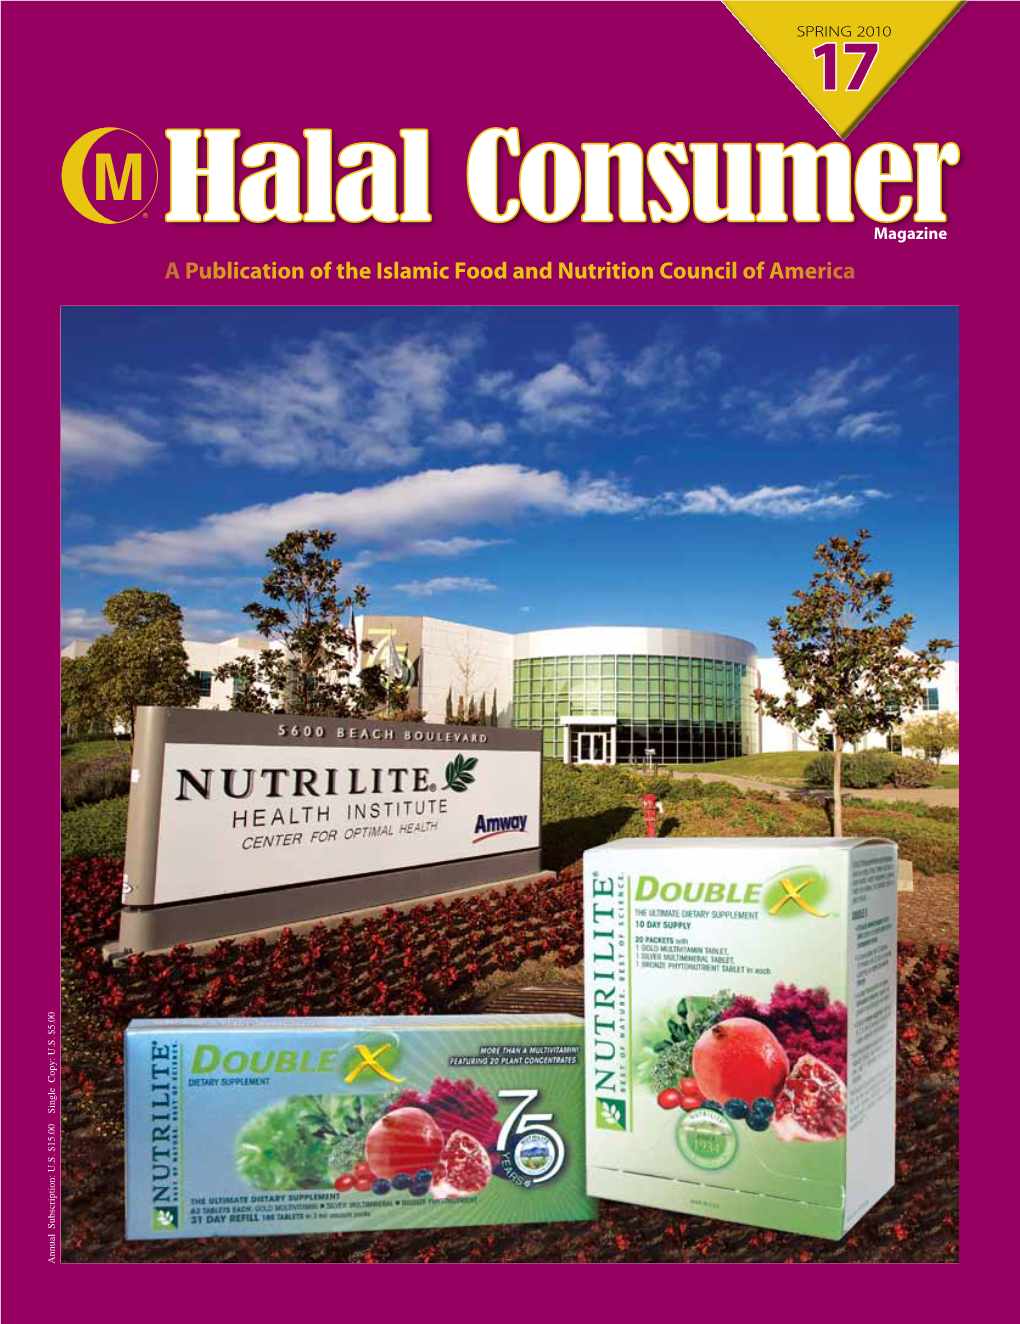 A Publication of the Islamic Food and Nutrition Council of America Annual Subscription: U.S